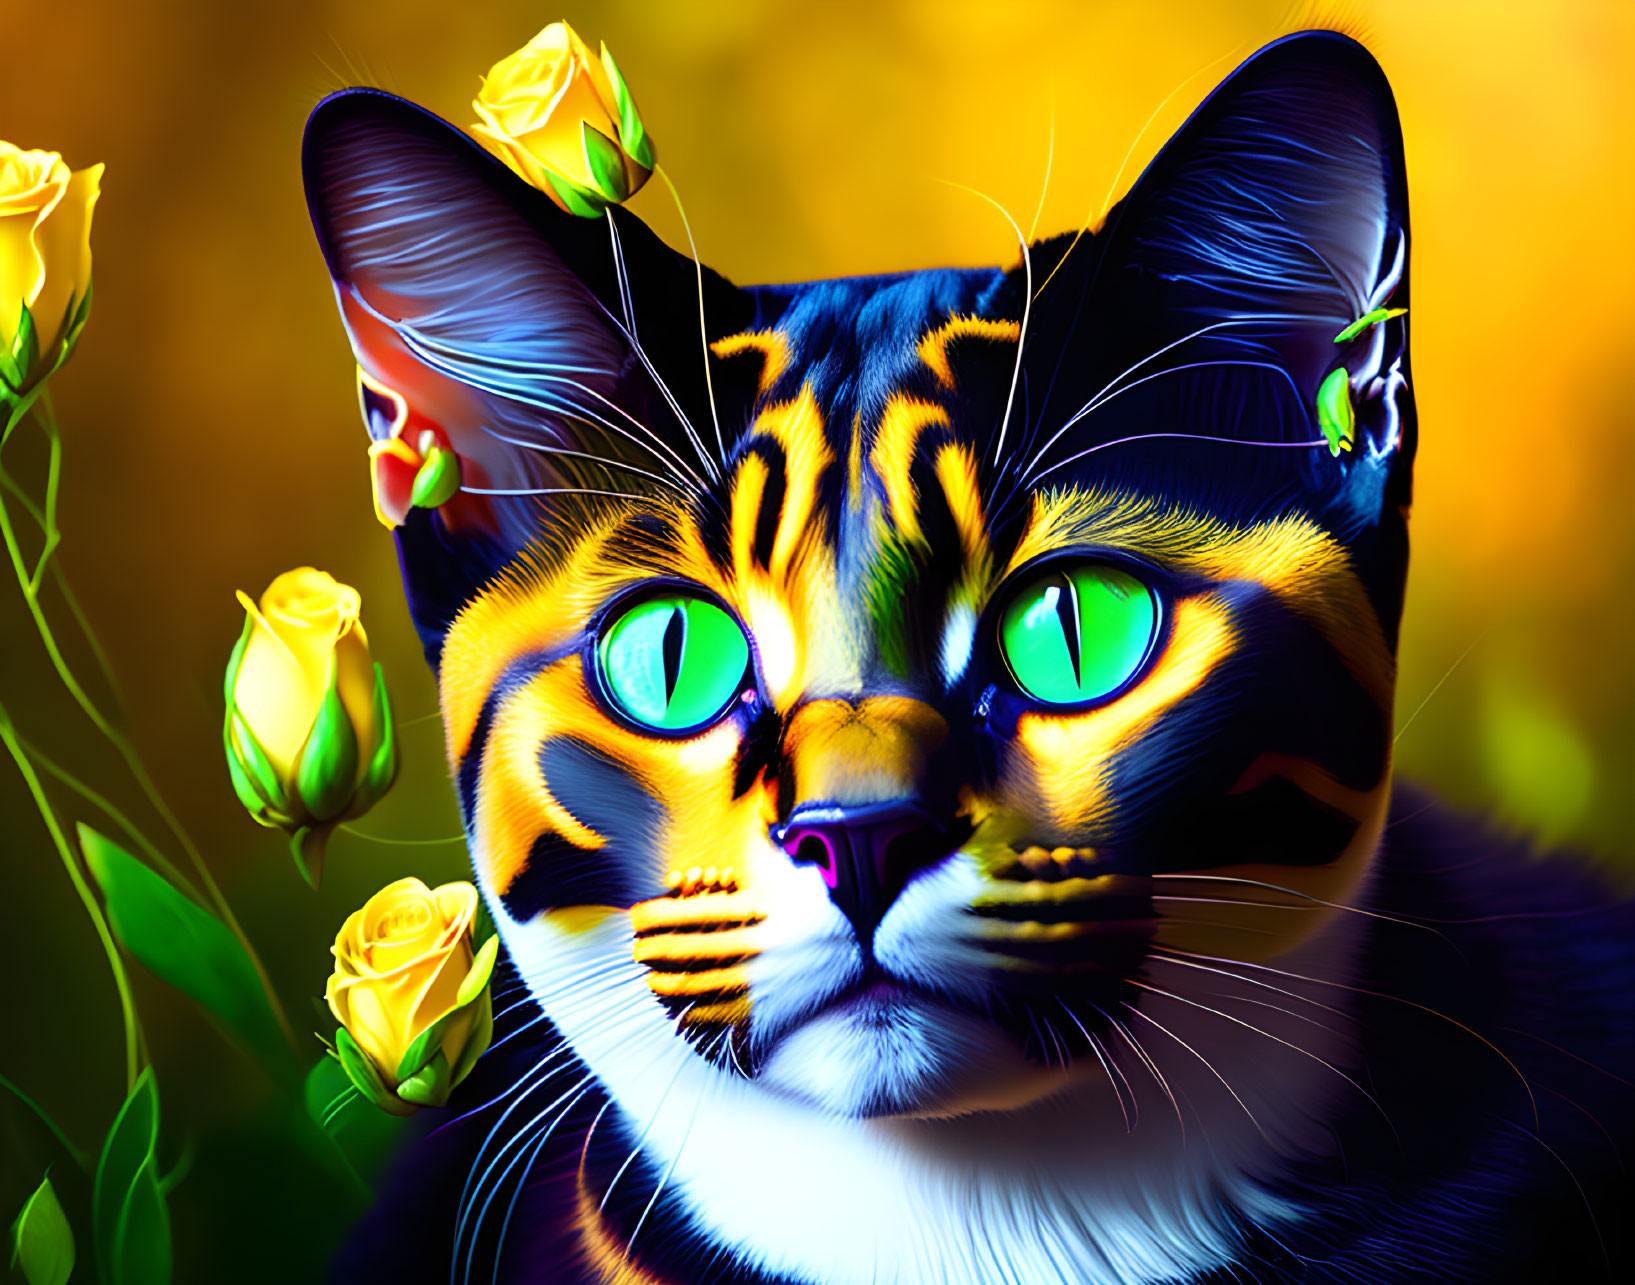 Colorful Cat Artwork with Green-Eyed Cat and Yellow Roses